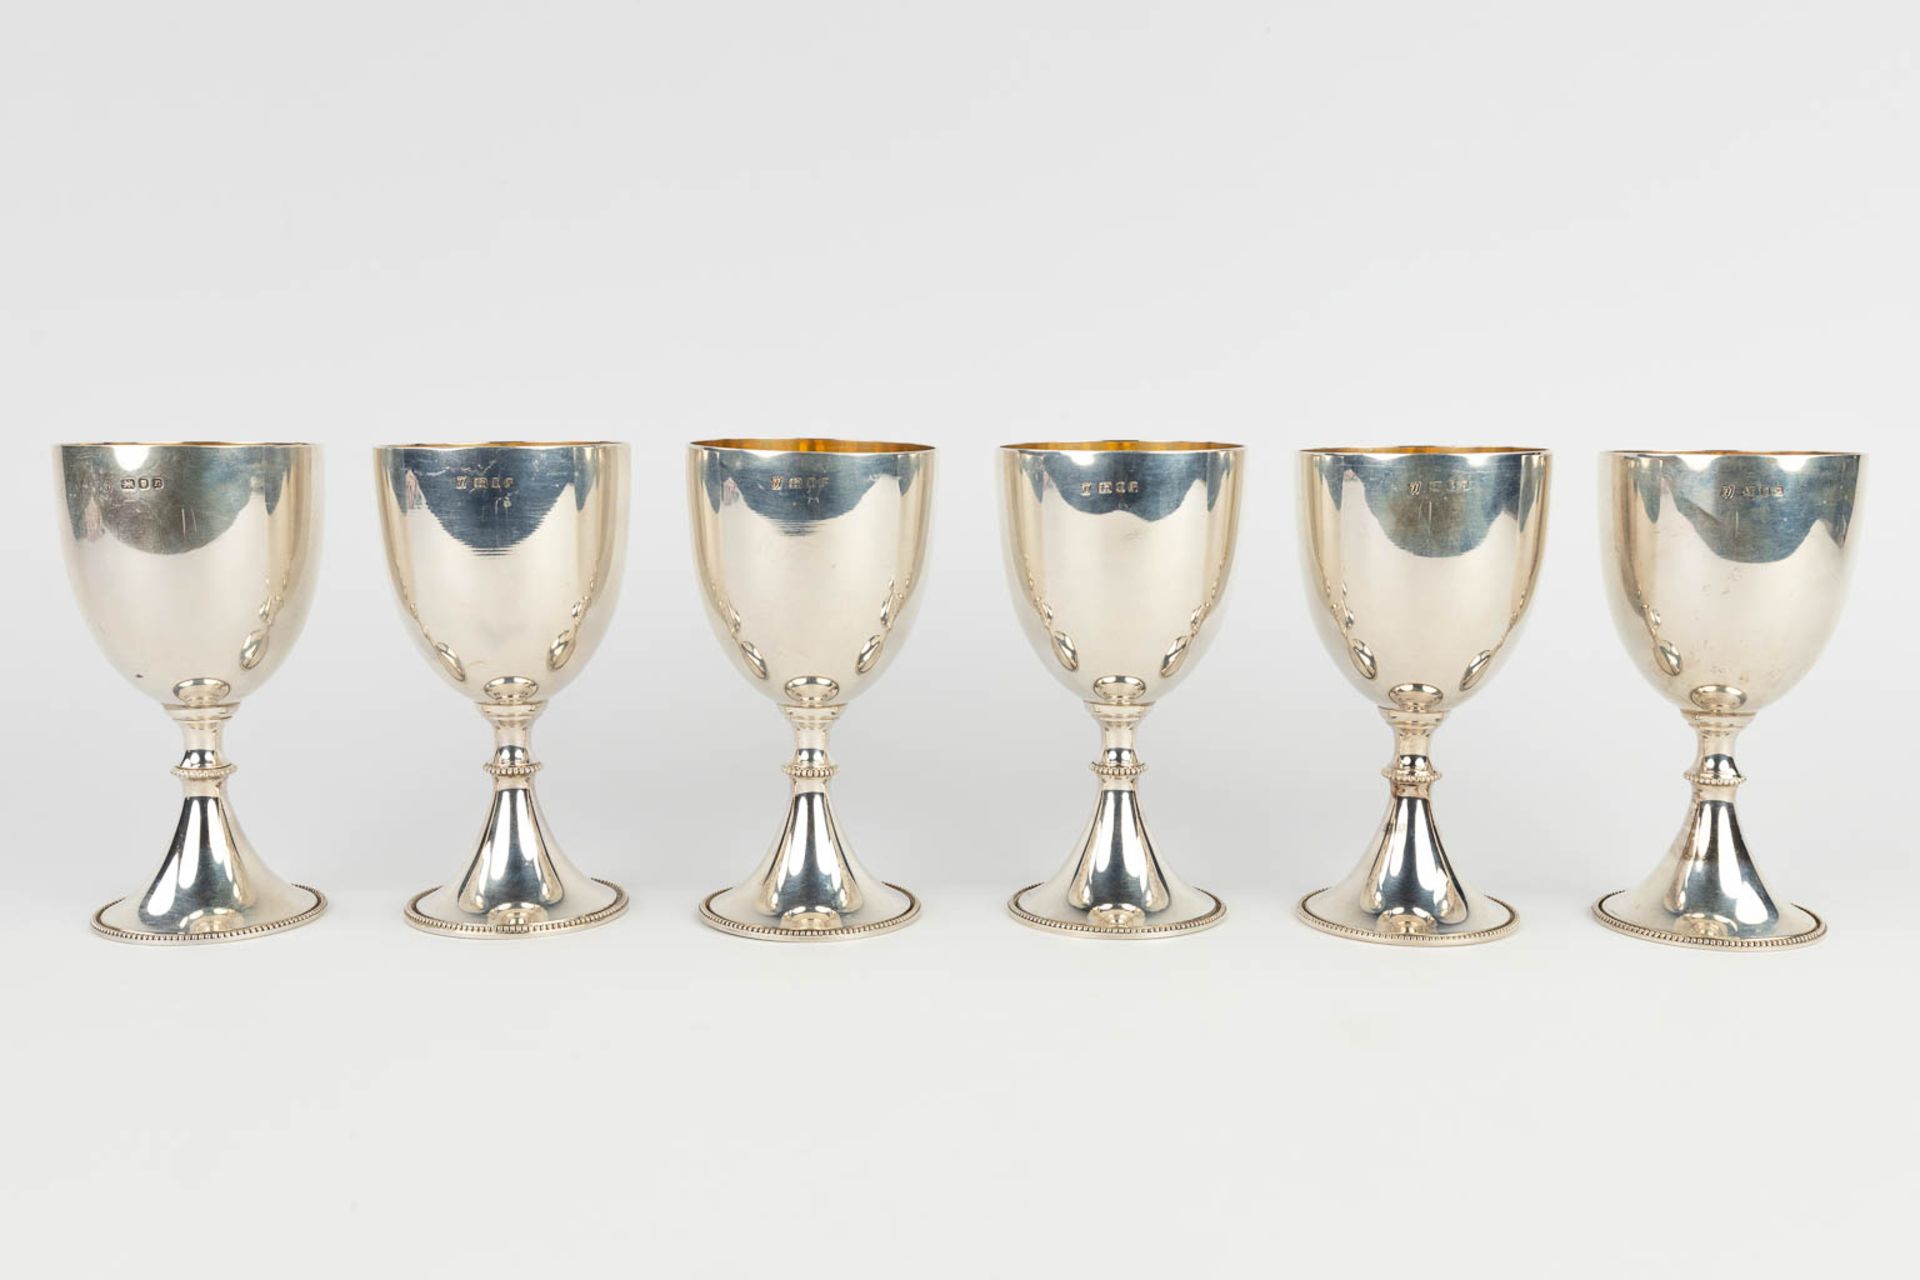 A set of 6 silver goblets, made by Trevor Towner in England, 1972. 1097g. (H: 14,5 x D: 7,5 cm) - Bild 3 aus 7